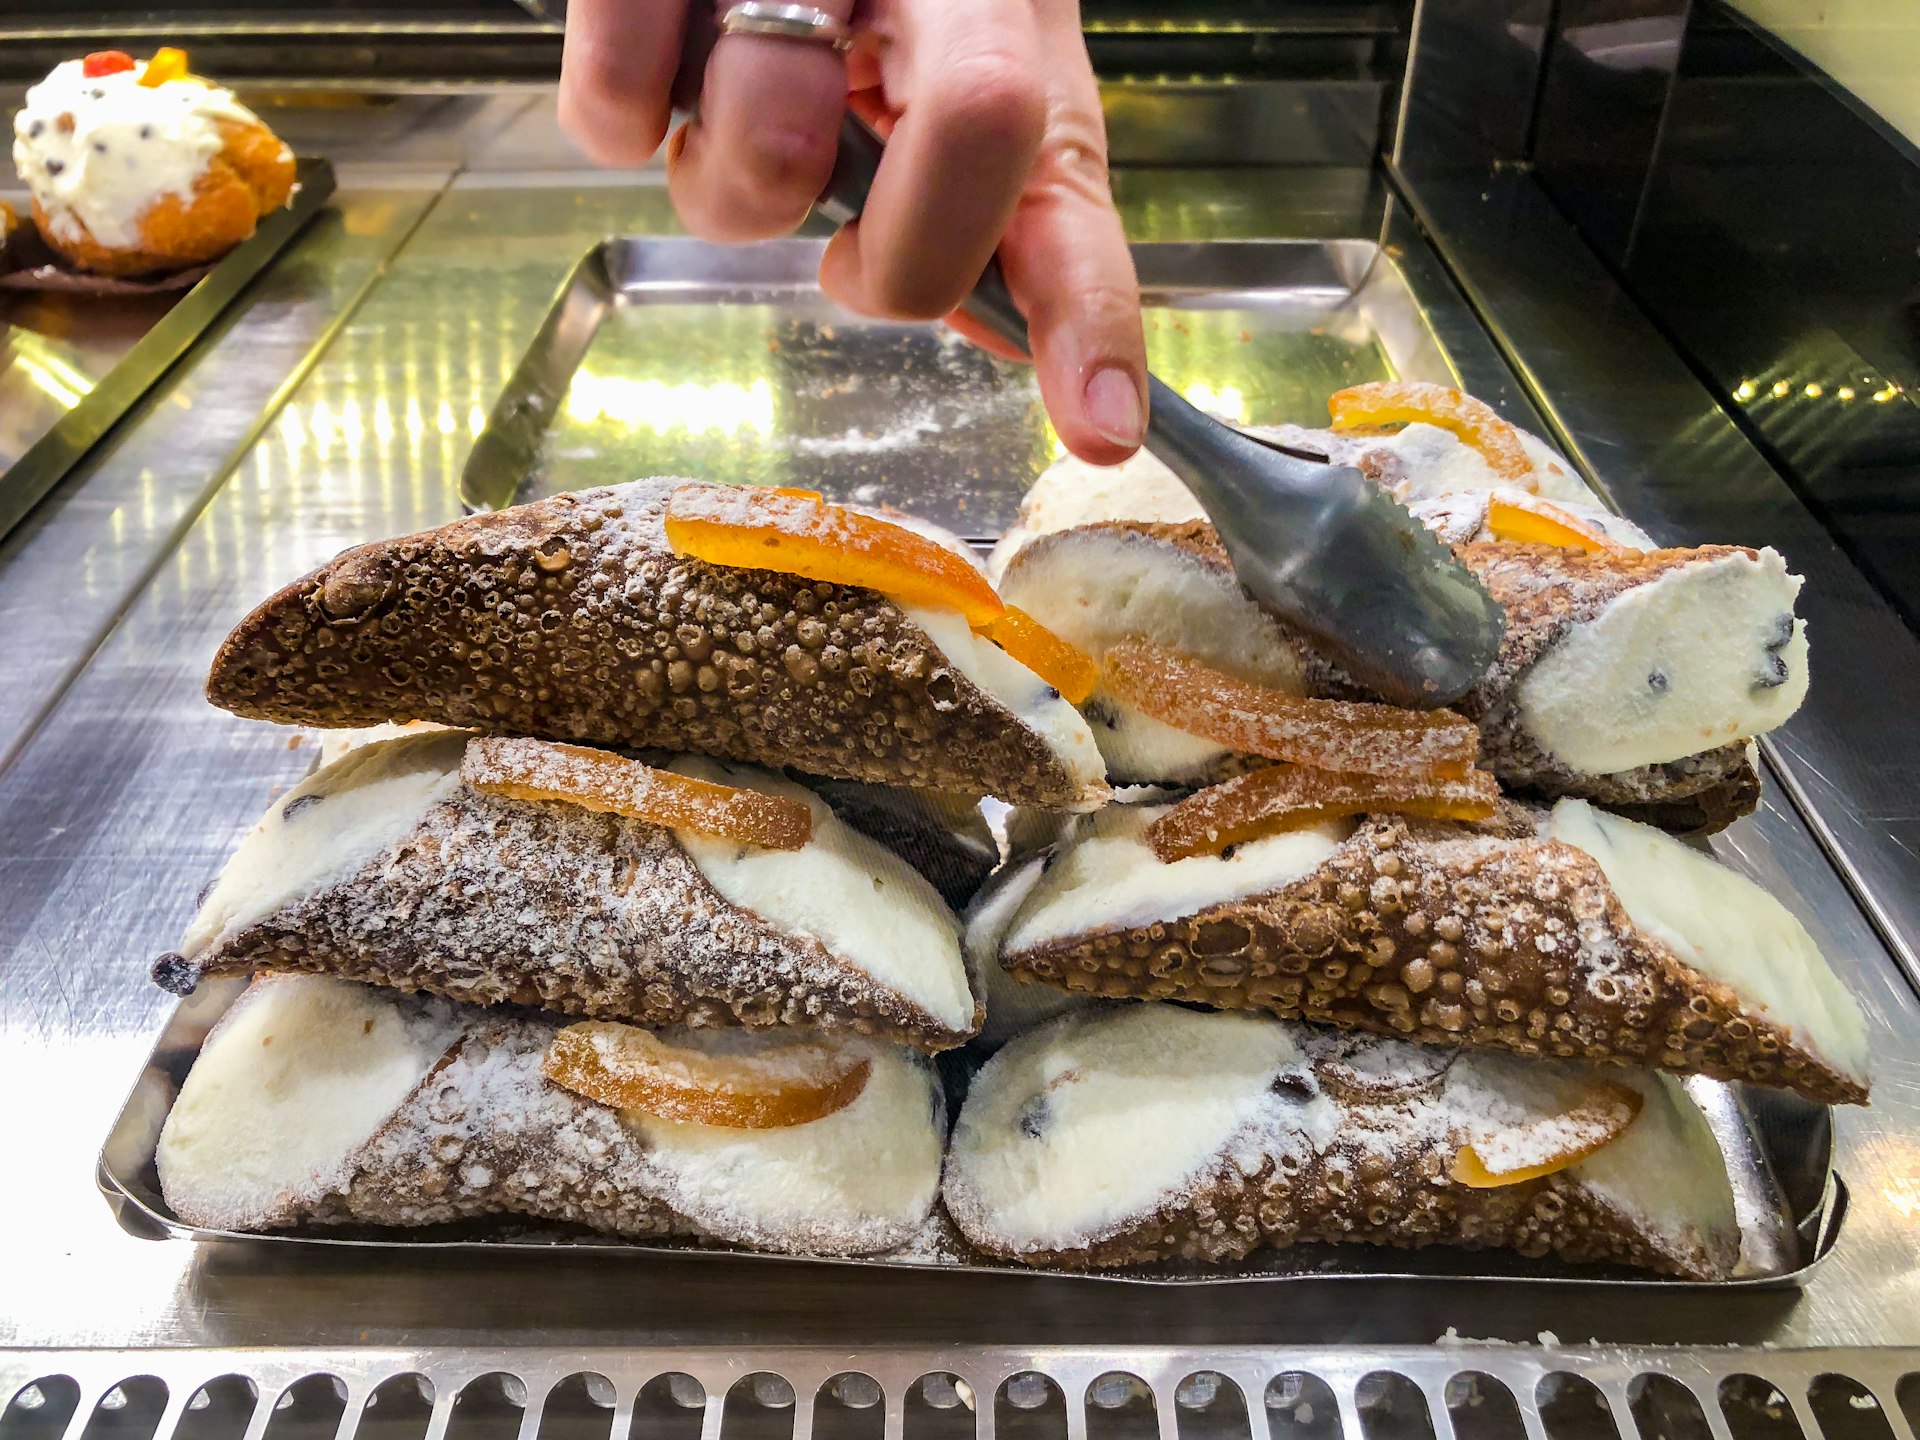  a person in a Sicilian pastry shop serves traditional ricotta cannoli with candied oranges. A pastry chef takes some desserts with pincers